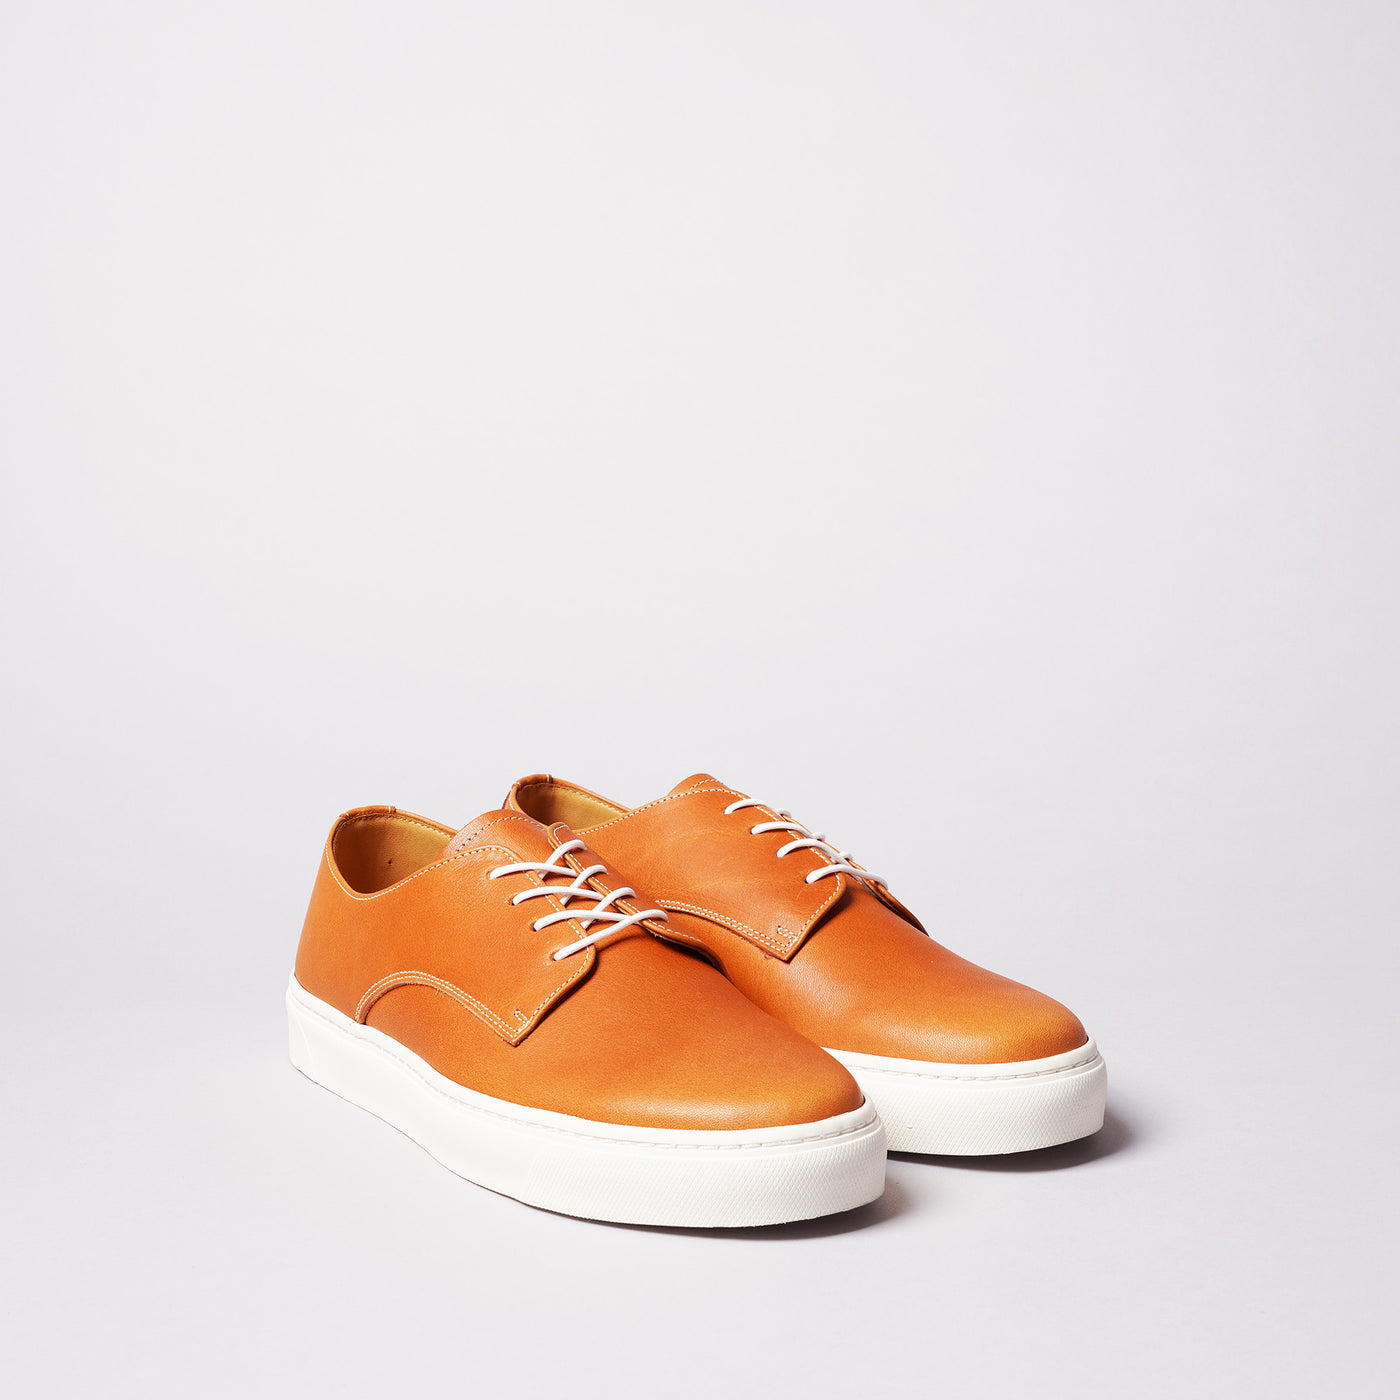 <TOSS> Bath Bath Lace-up Leather Sneaker Tochigi Tanned Leather/Brown